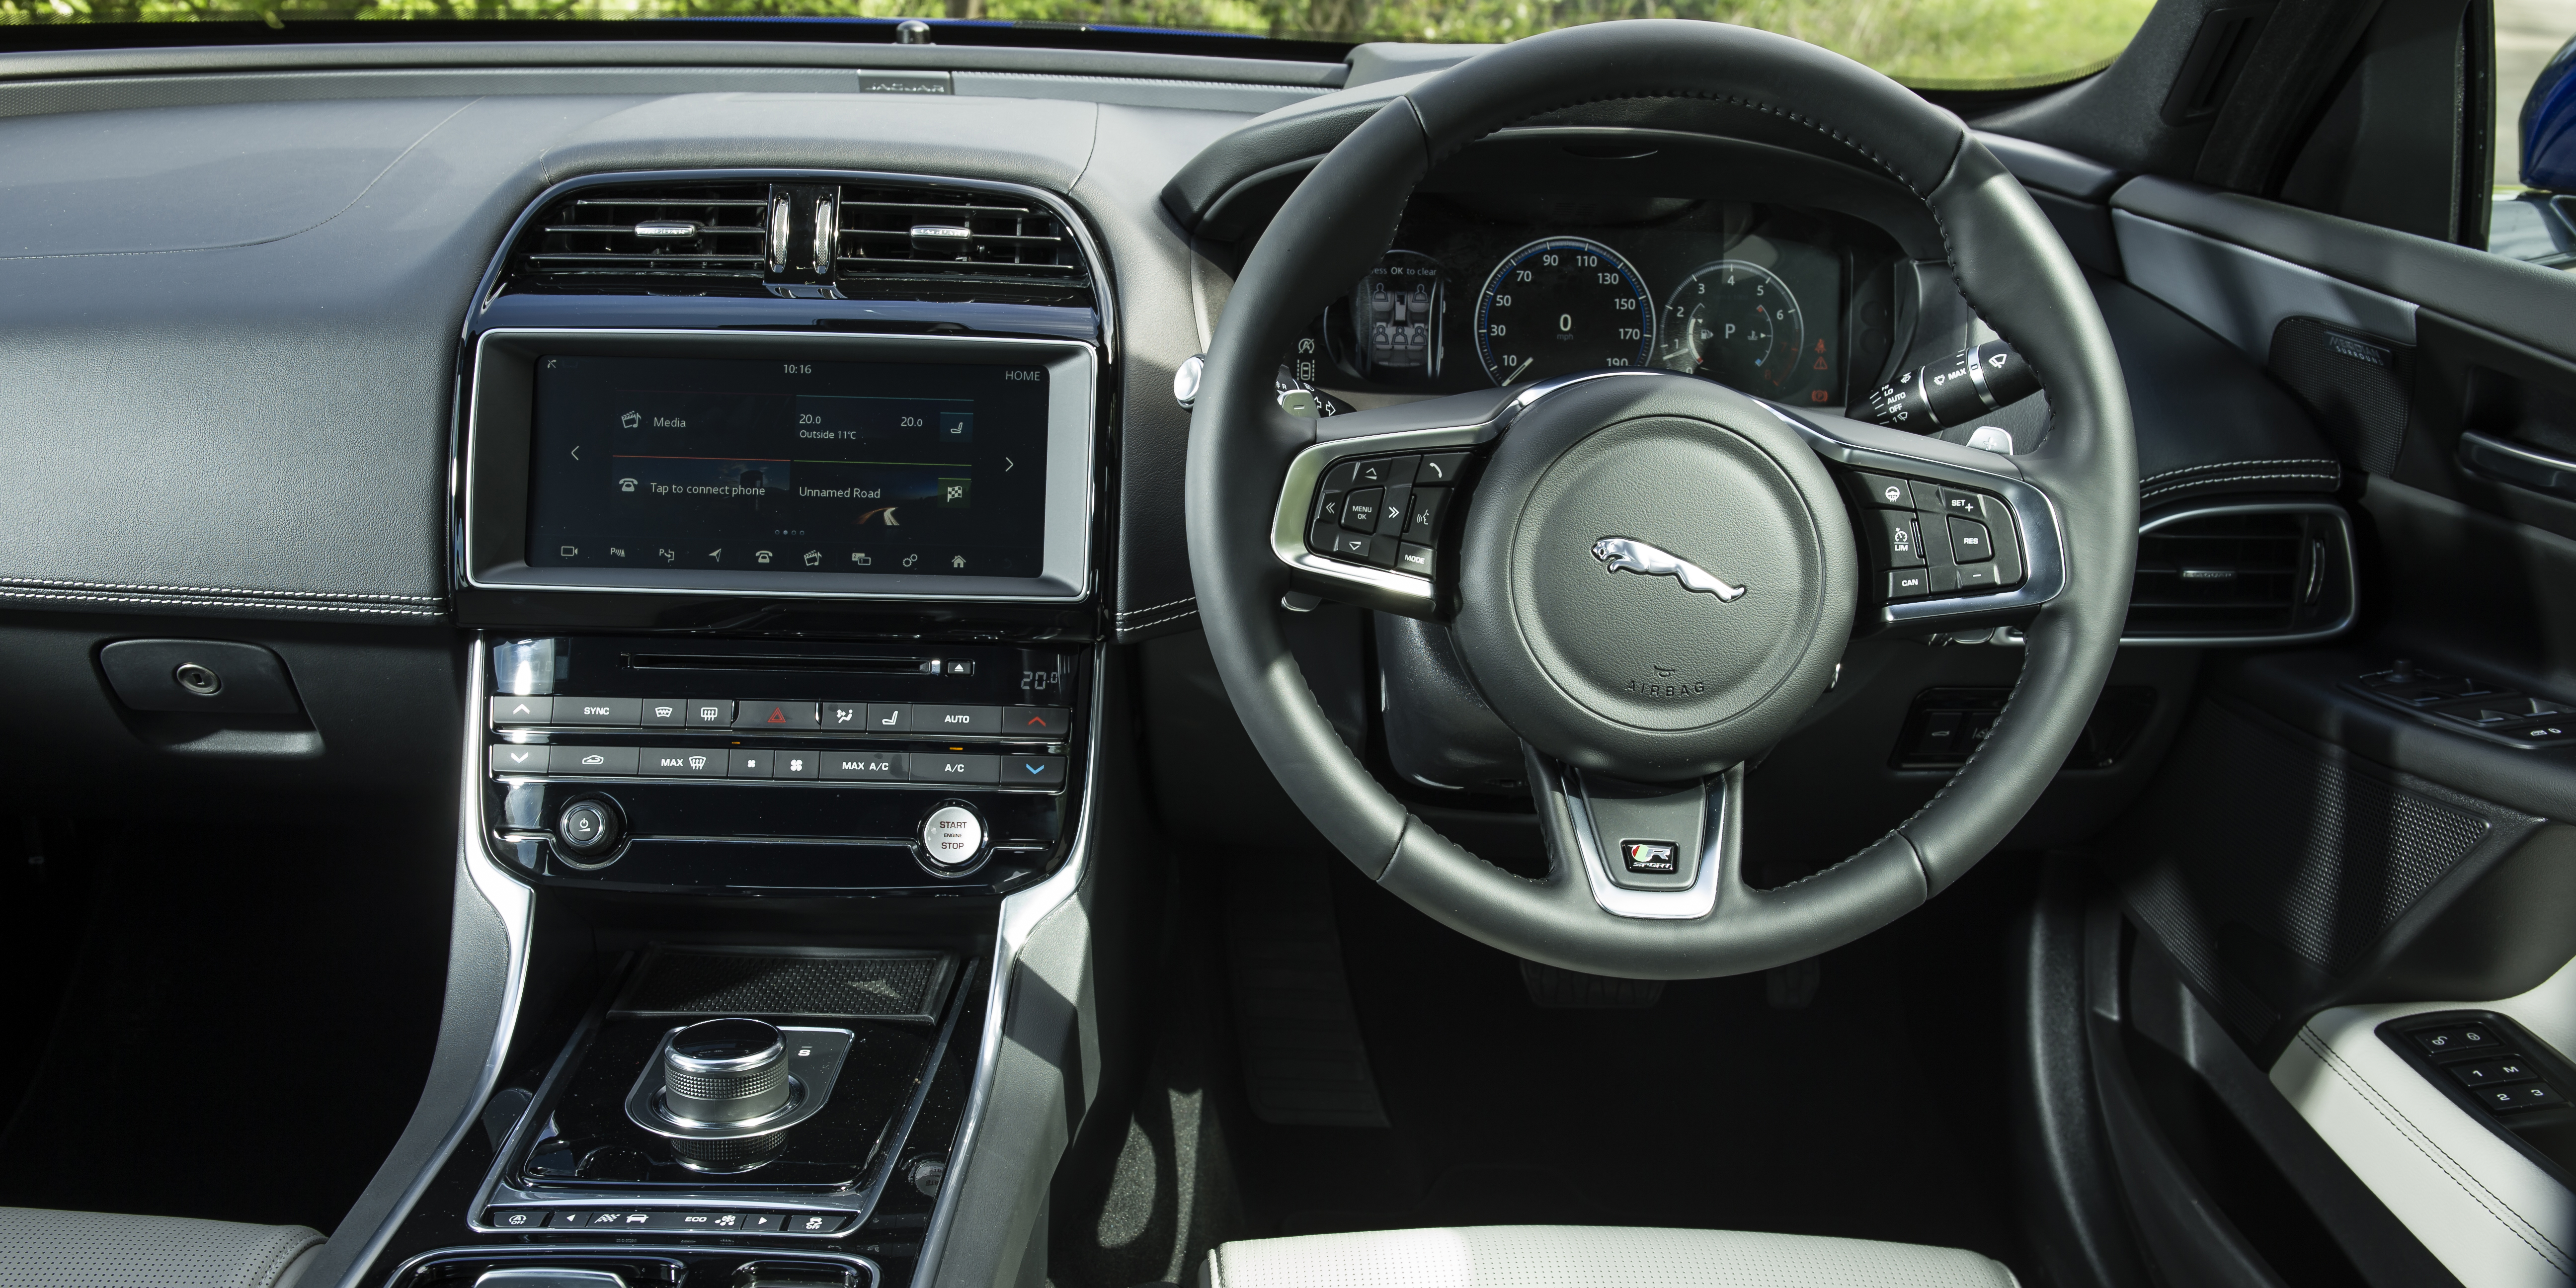 The upgraded InControl Touch Pro infotainment system gives you a digital driver's display too